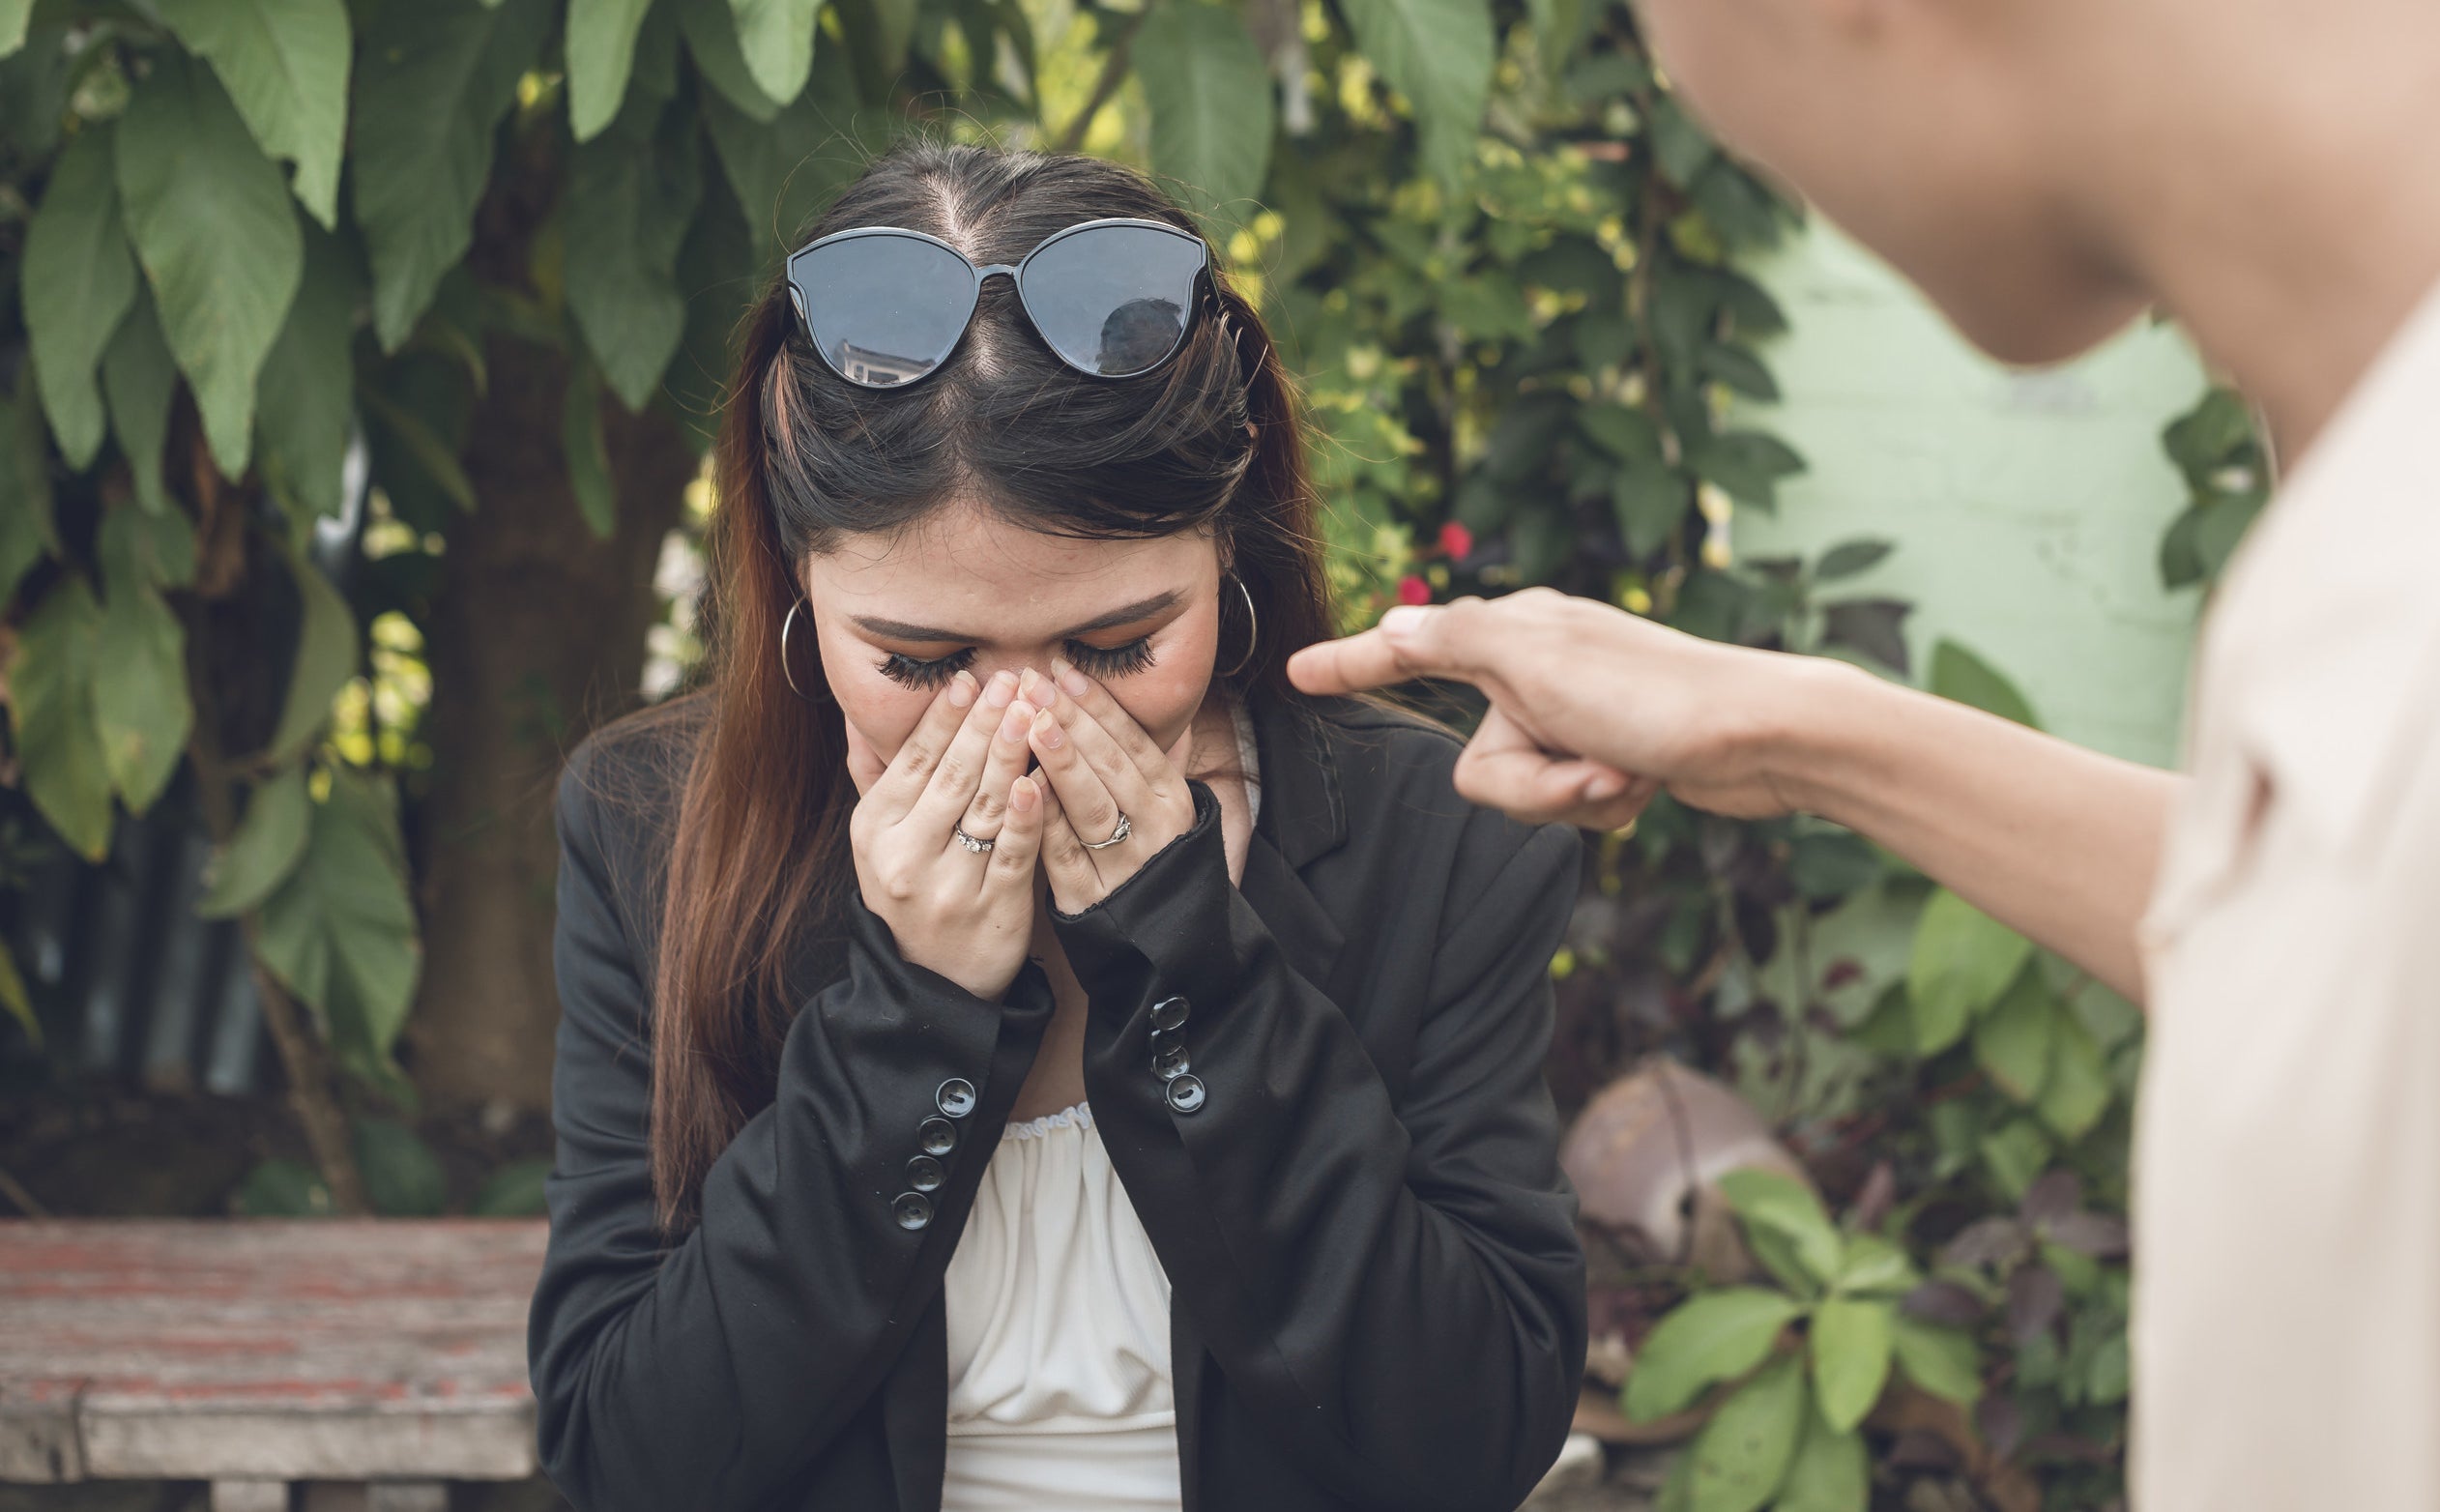 woman crying as man points finger close to her